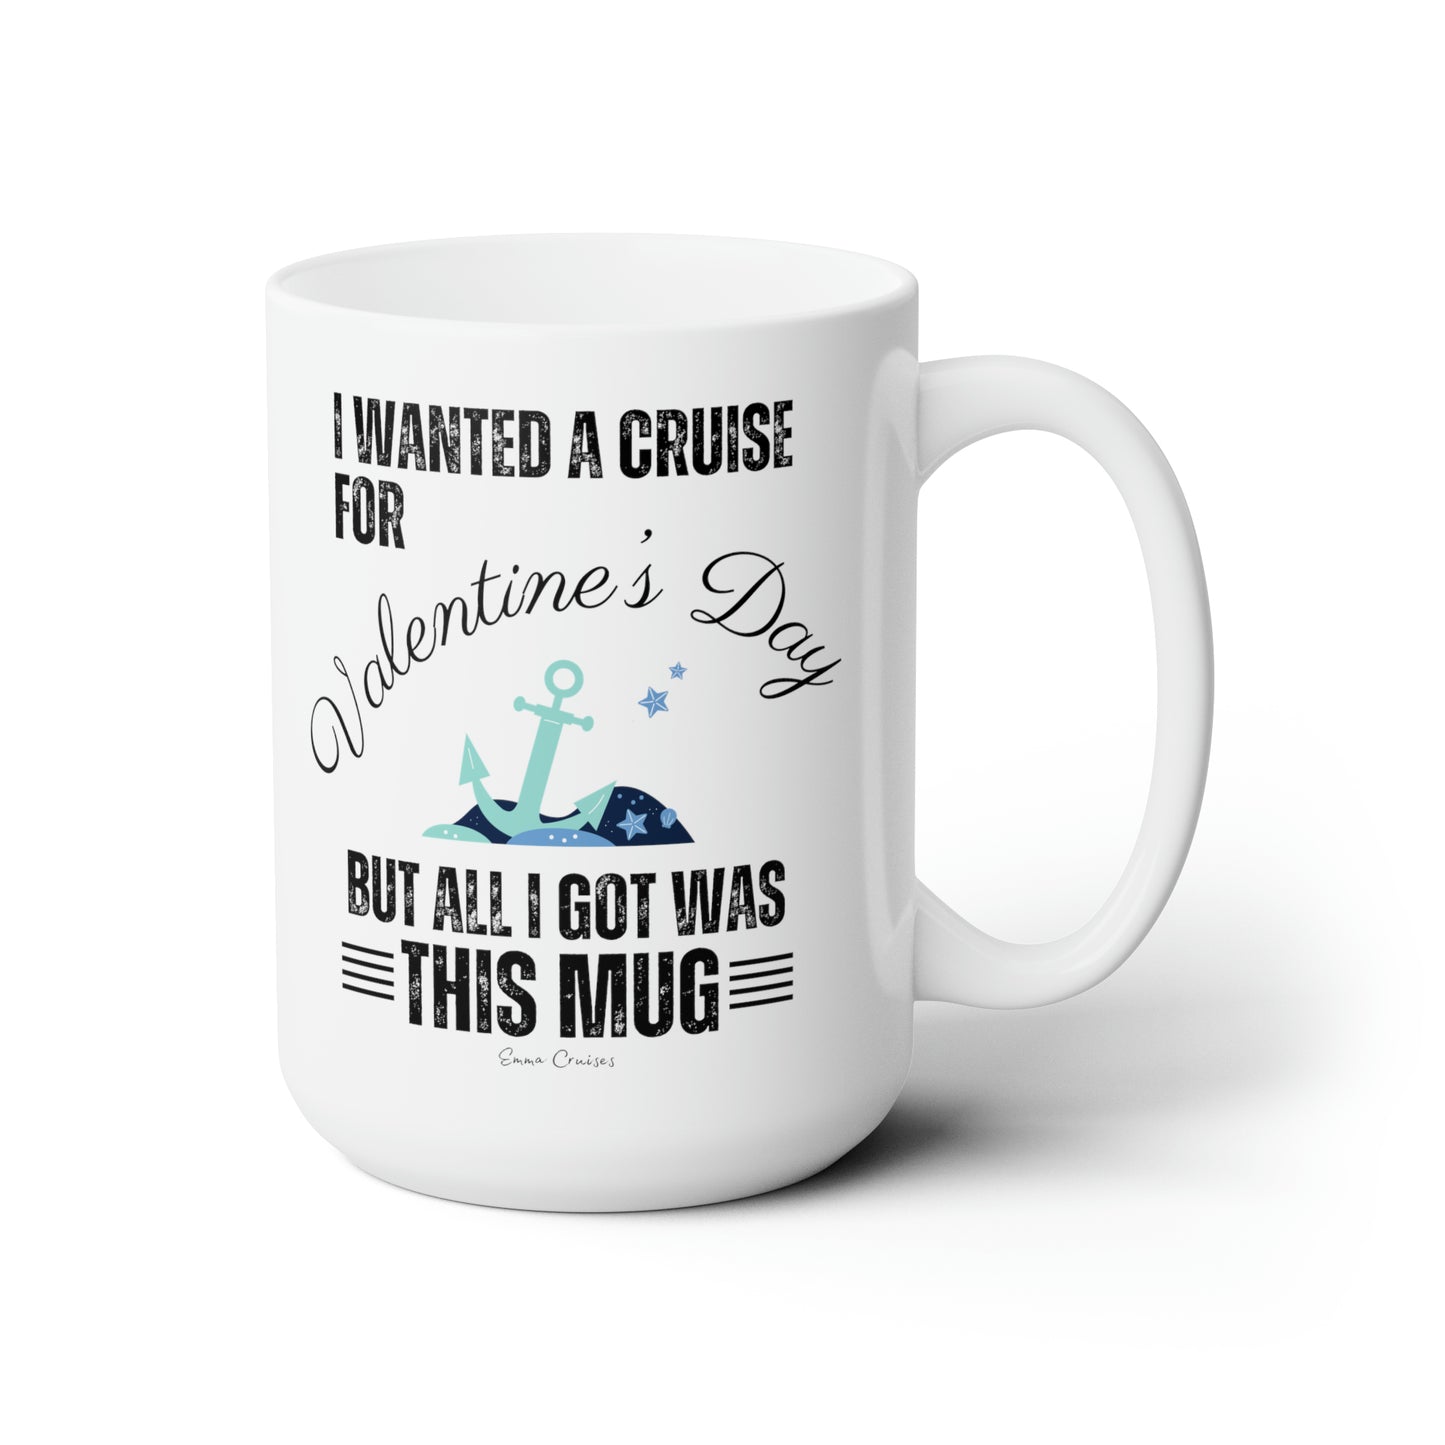 I Wanted a Cruise for Valentine's Day - Ceramic Mug